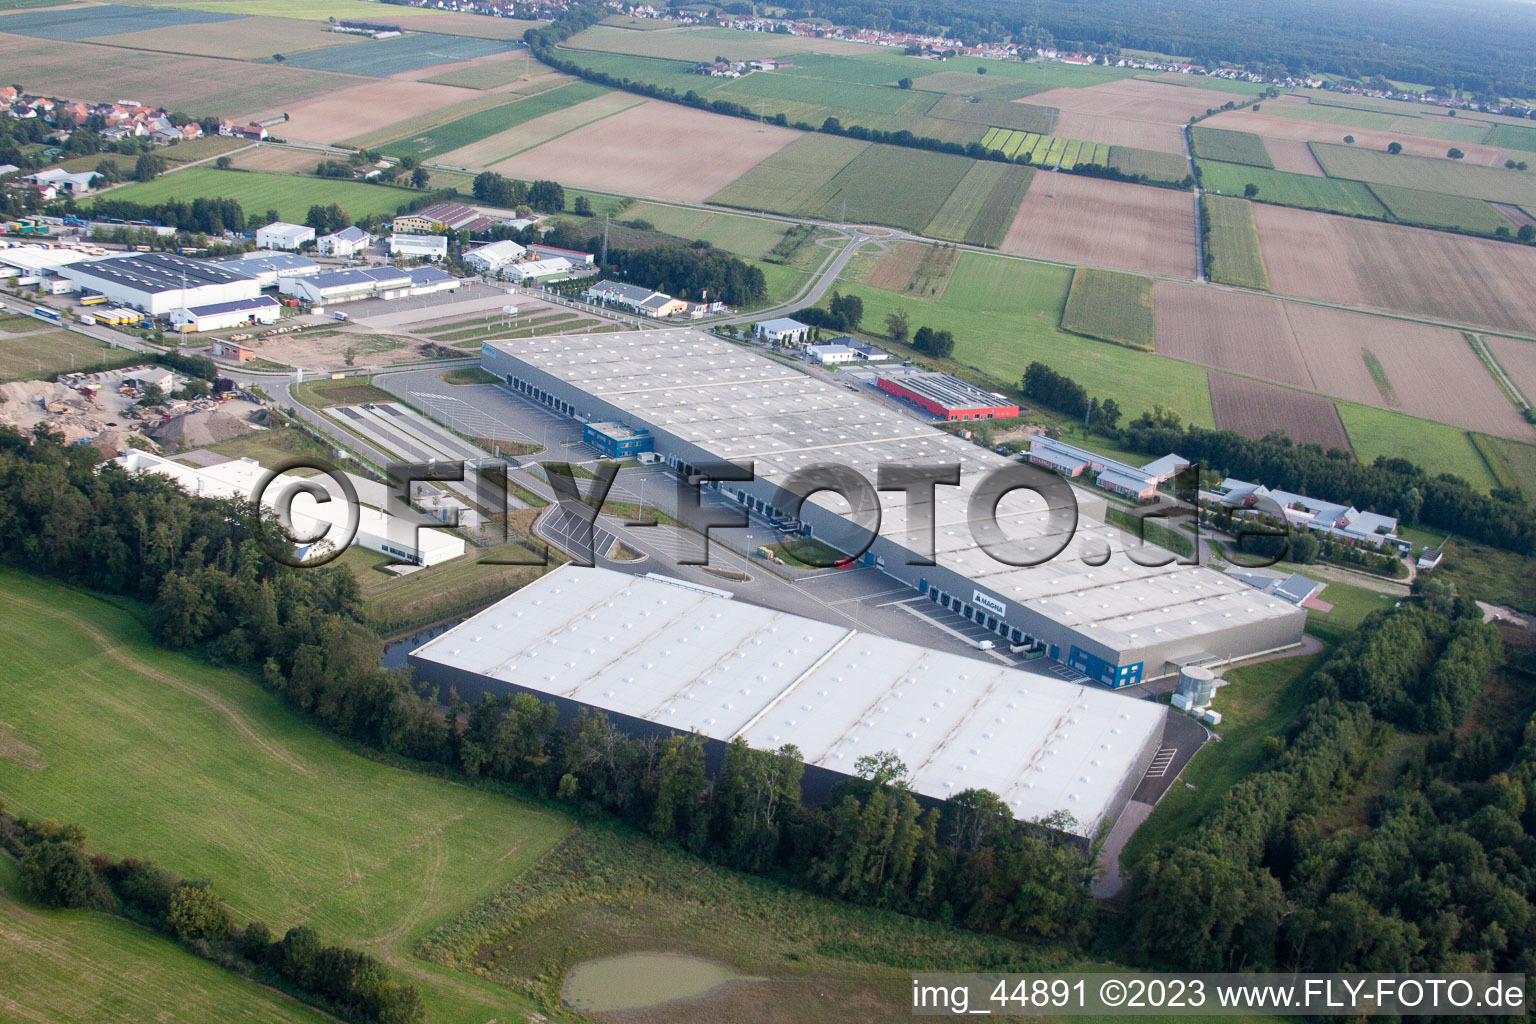 Horst industrial area in the district Minderslachen in Kandel in the state Rhineland-Palatinate, Germany from a drone